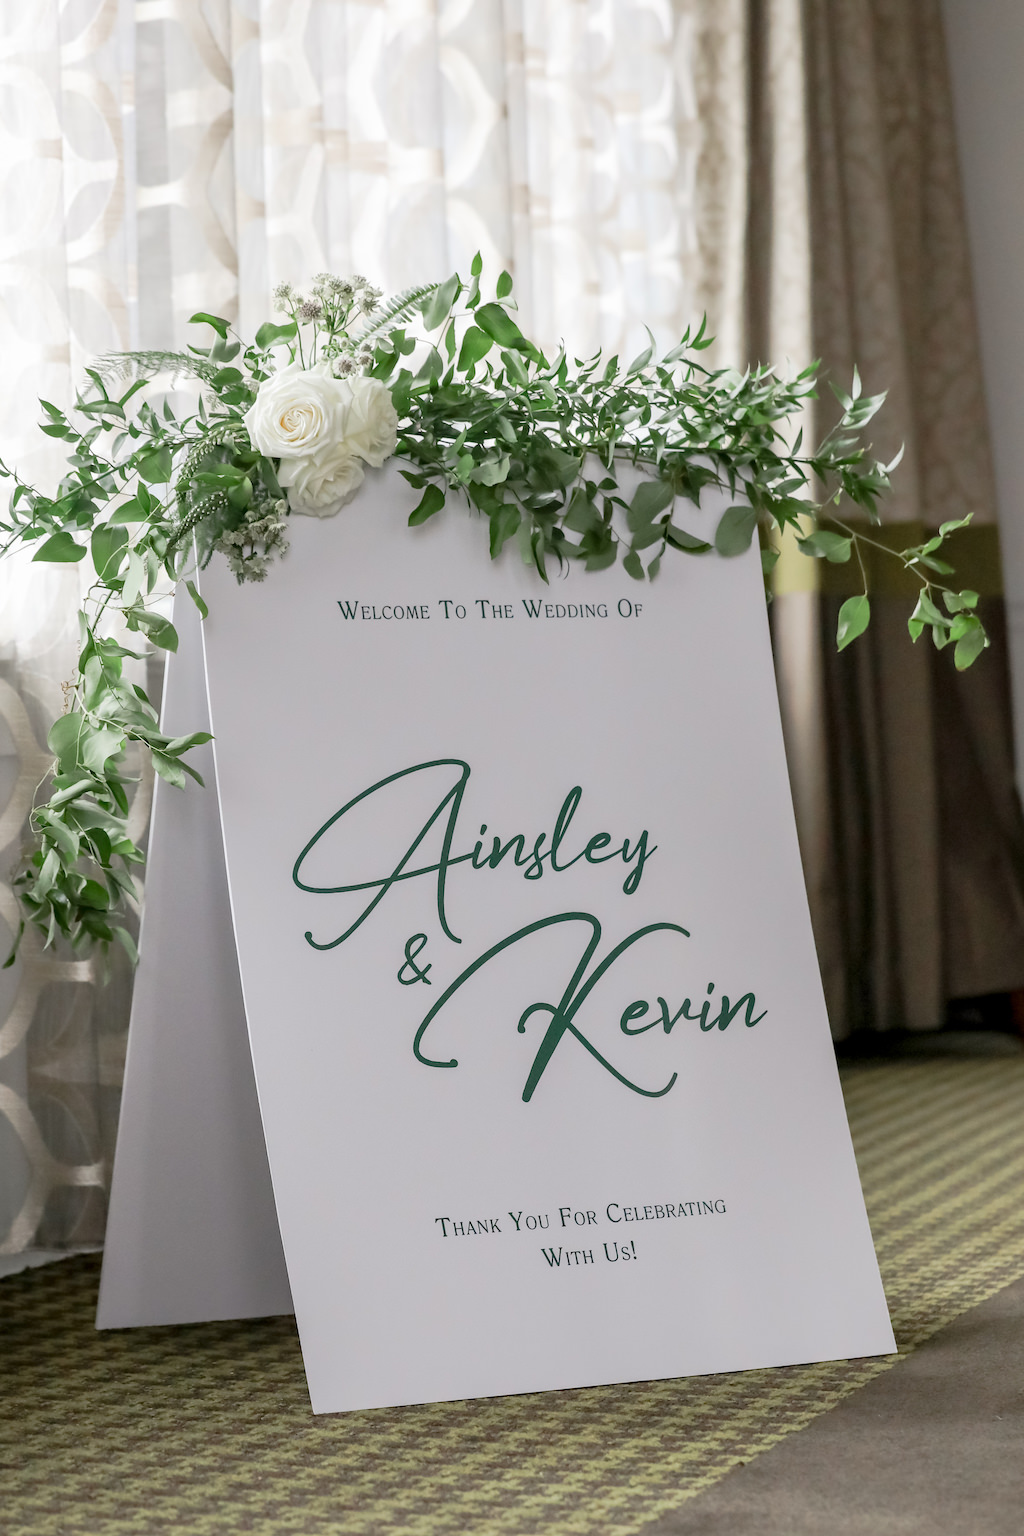 Wedding Ceremony Decor, White and Green Font Custom A-Frame Wedding Sign with White Roses and Greenery Garland | Tampa Bay Photographer Lifelong Photography Studios | Stationary/Signage Sarah Bubar Designs | Planner Parties A'La Carte | Florist Cotton and Magnolia